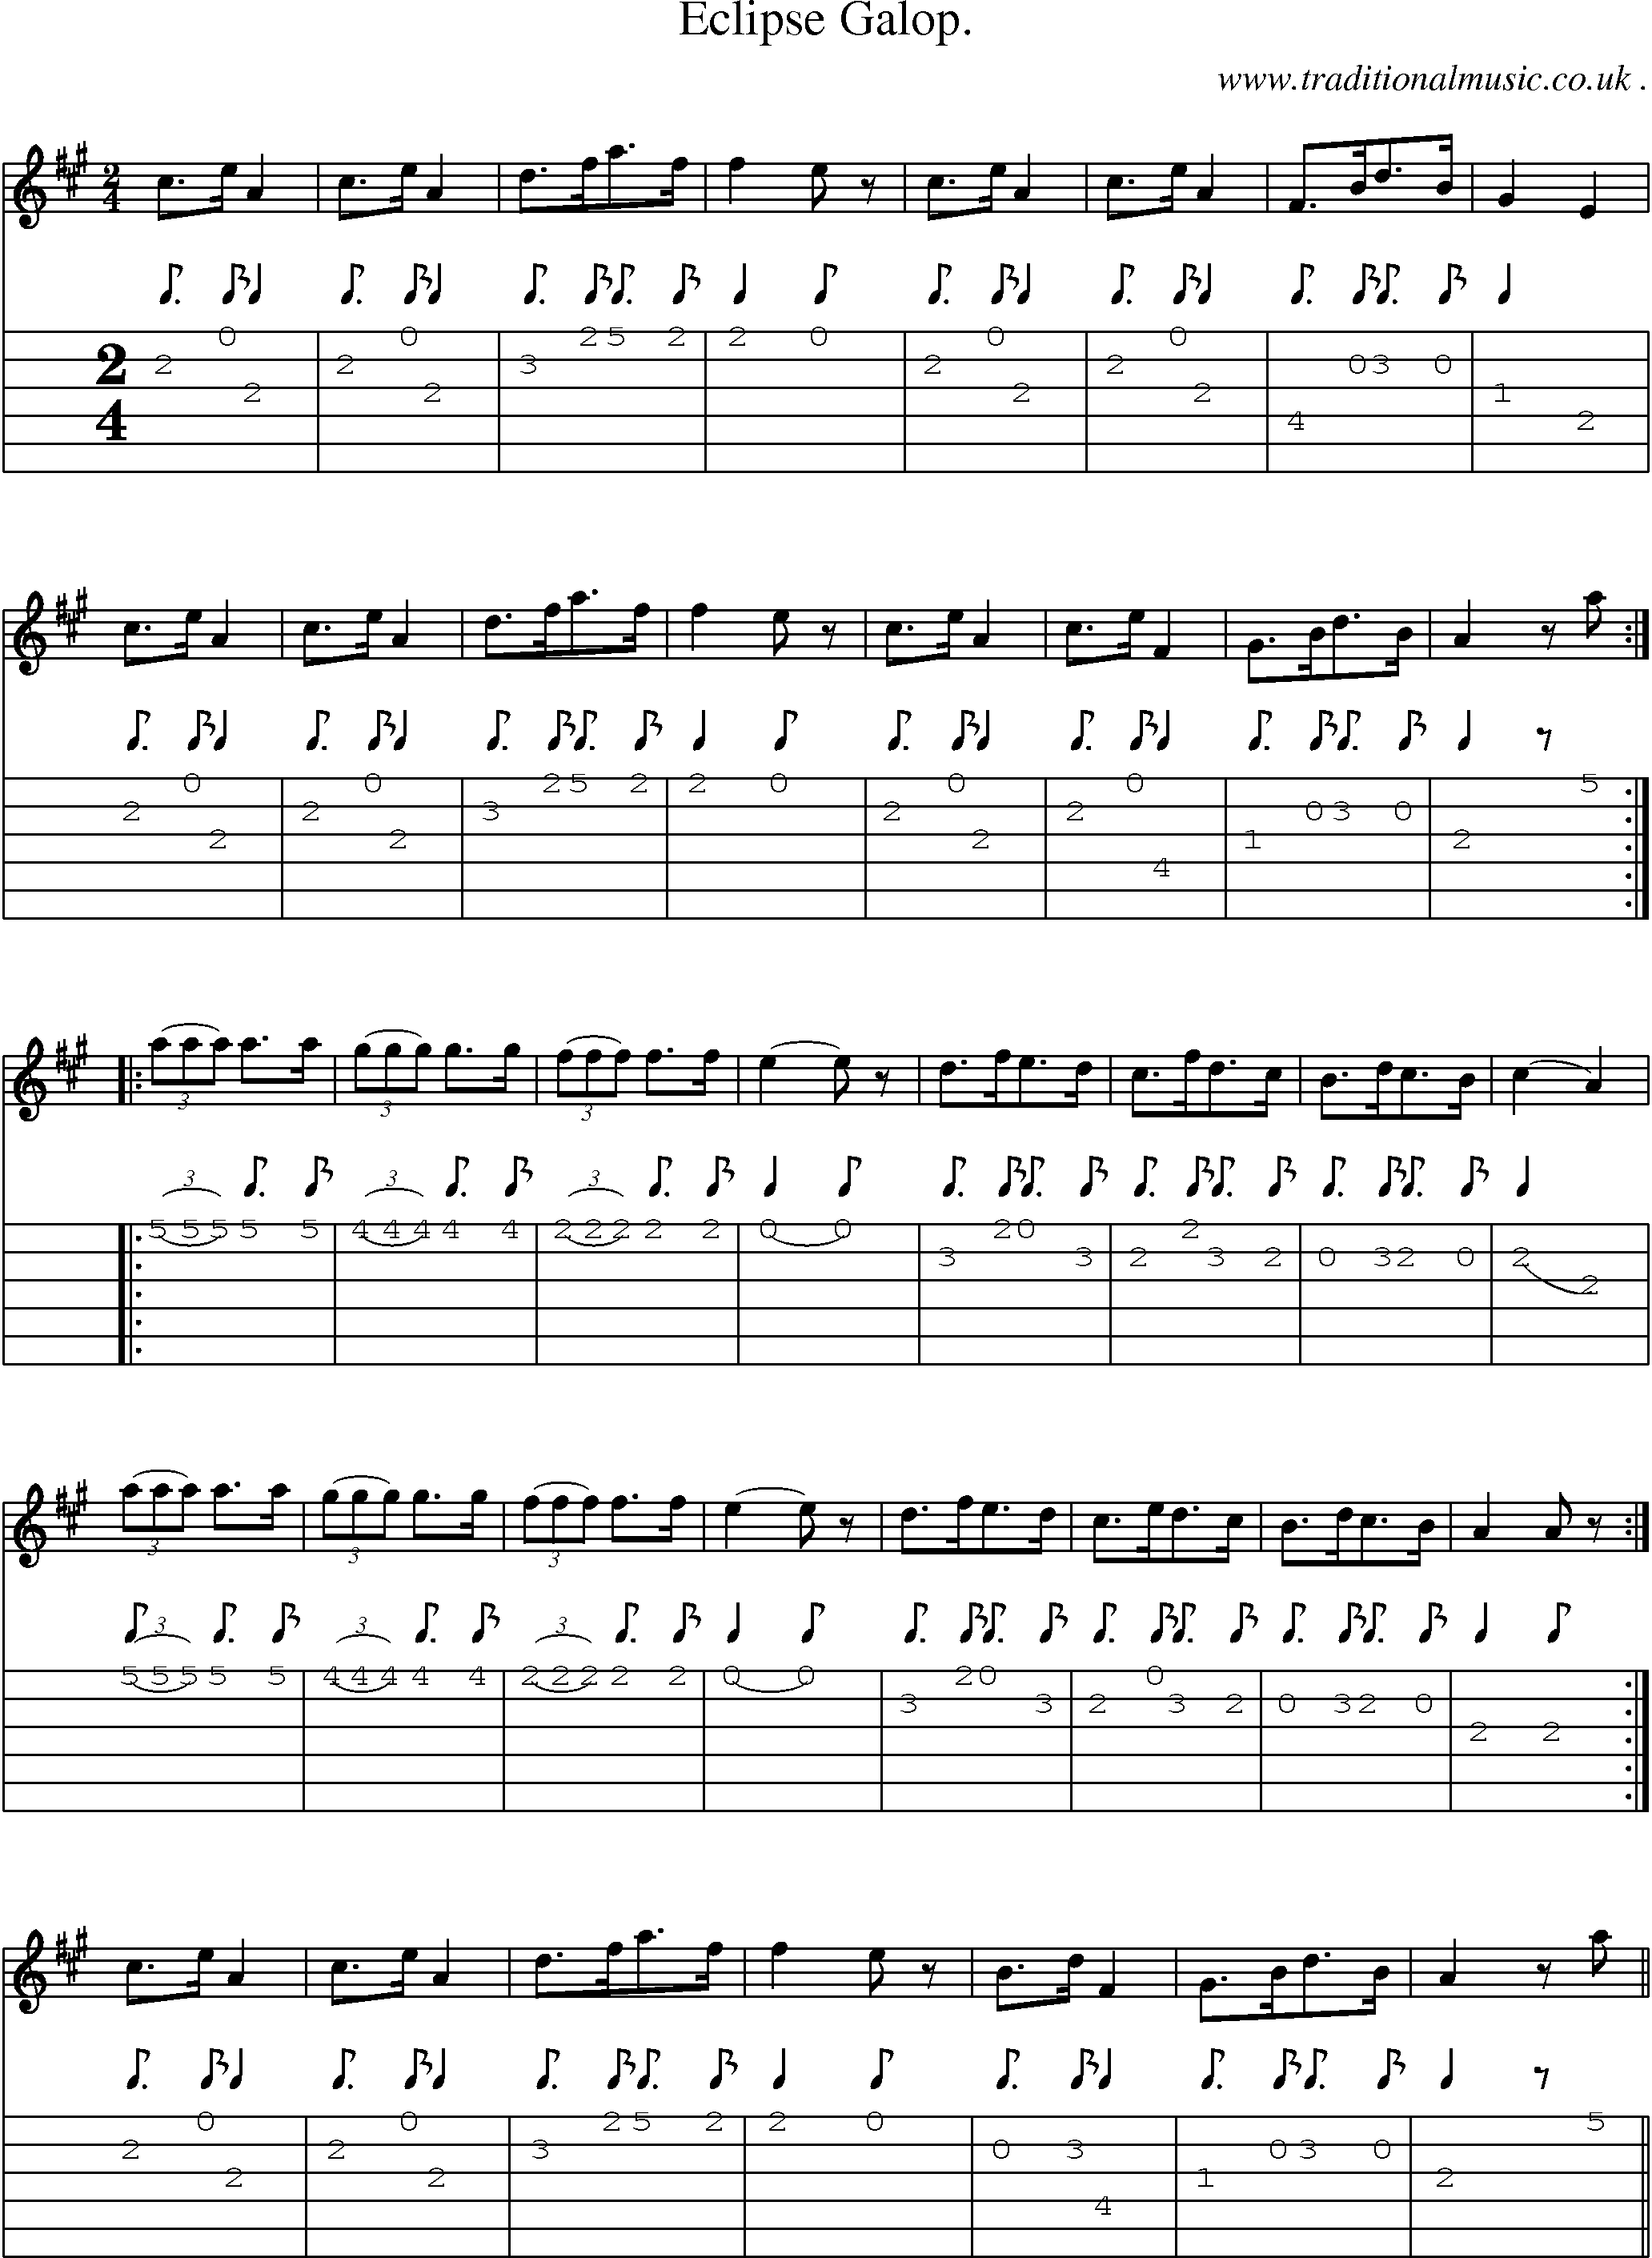 Sheet-Music and Guitar Tabs for Eclipse Galop